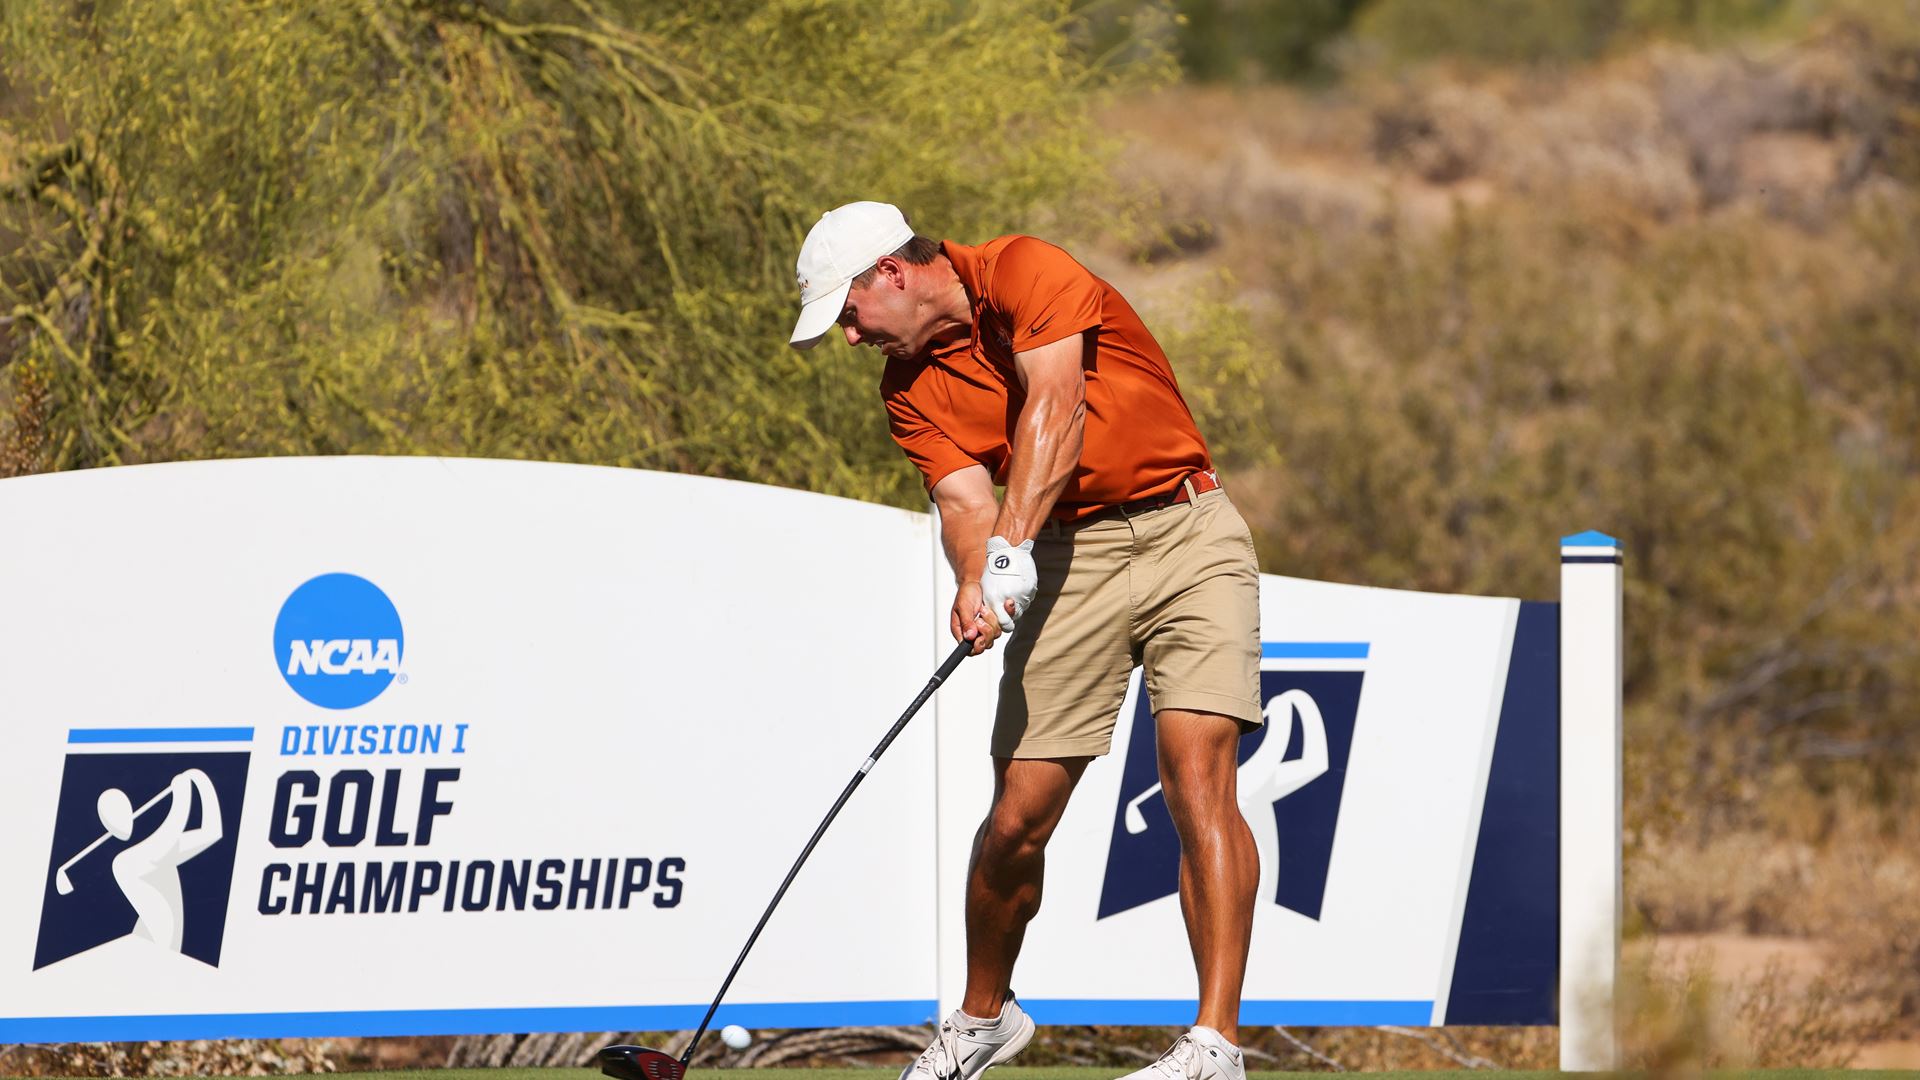 TaylorMade Golf Company Announces Signings of Four Former NCAA Golf Standouts Pierceson Coody, Jacob Bridgeman, Parker Coody and Cameron Sisk